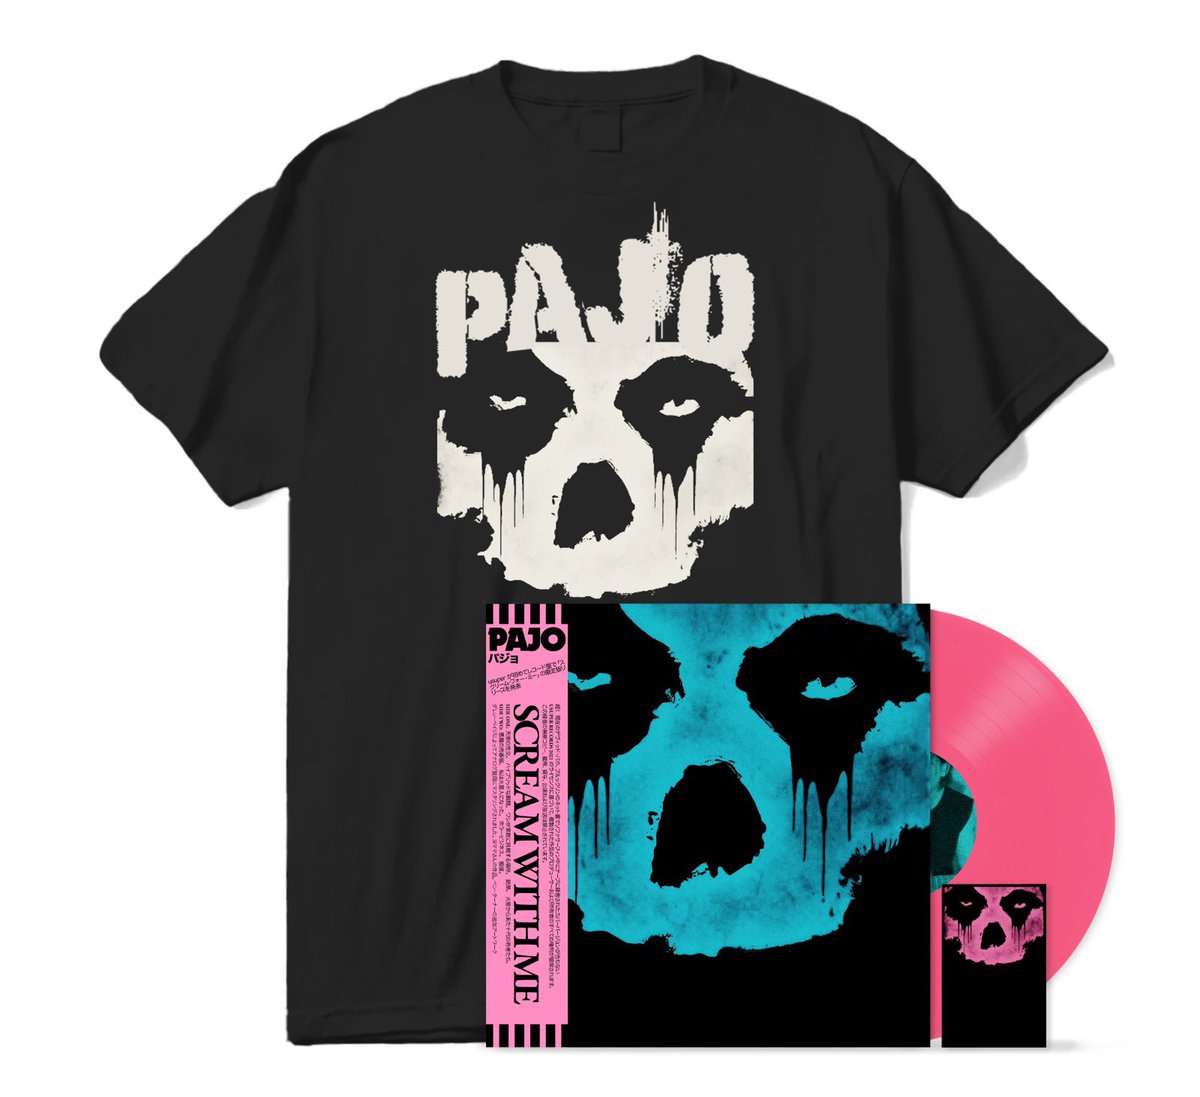 OUT NOW!!!! DAVID PAJO - SCREAM WITH ME 140G FLOURESCENT PINK VINYL GLOW IN THE DARK CASSETTE SCREAM WITH ME IS AN ACOUSTIC COVERS ALBUM OF MISFITS SONGS, RECORDED BY PAJO DIRECT TO CASSETTE WHILST COUCH SURFING IN BROOKLYN NY. Usupermusic.com